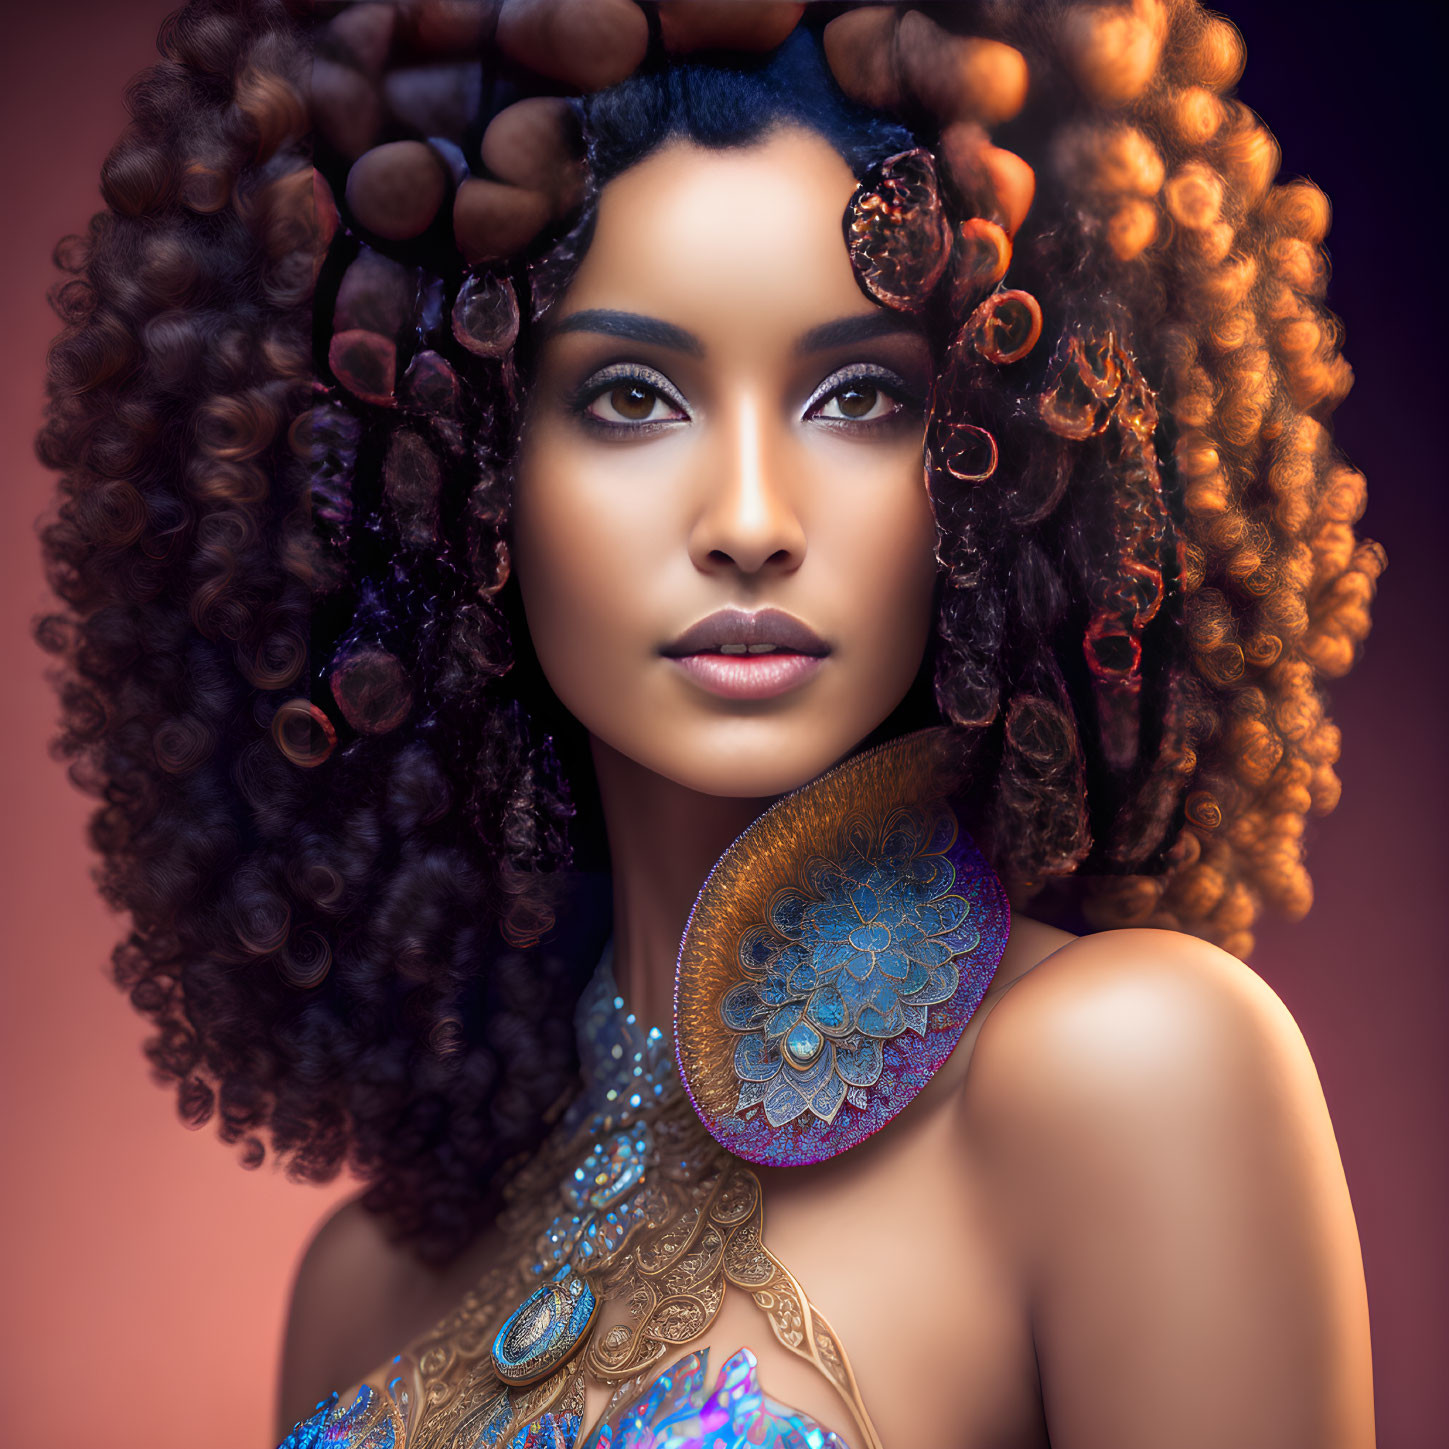 Woman with Voluminous Curly Hair and Ornate Earring in Blue Patterned Garment